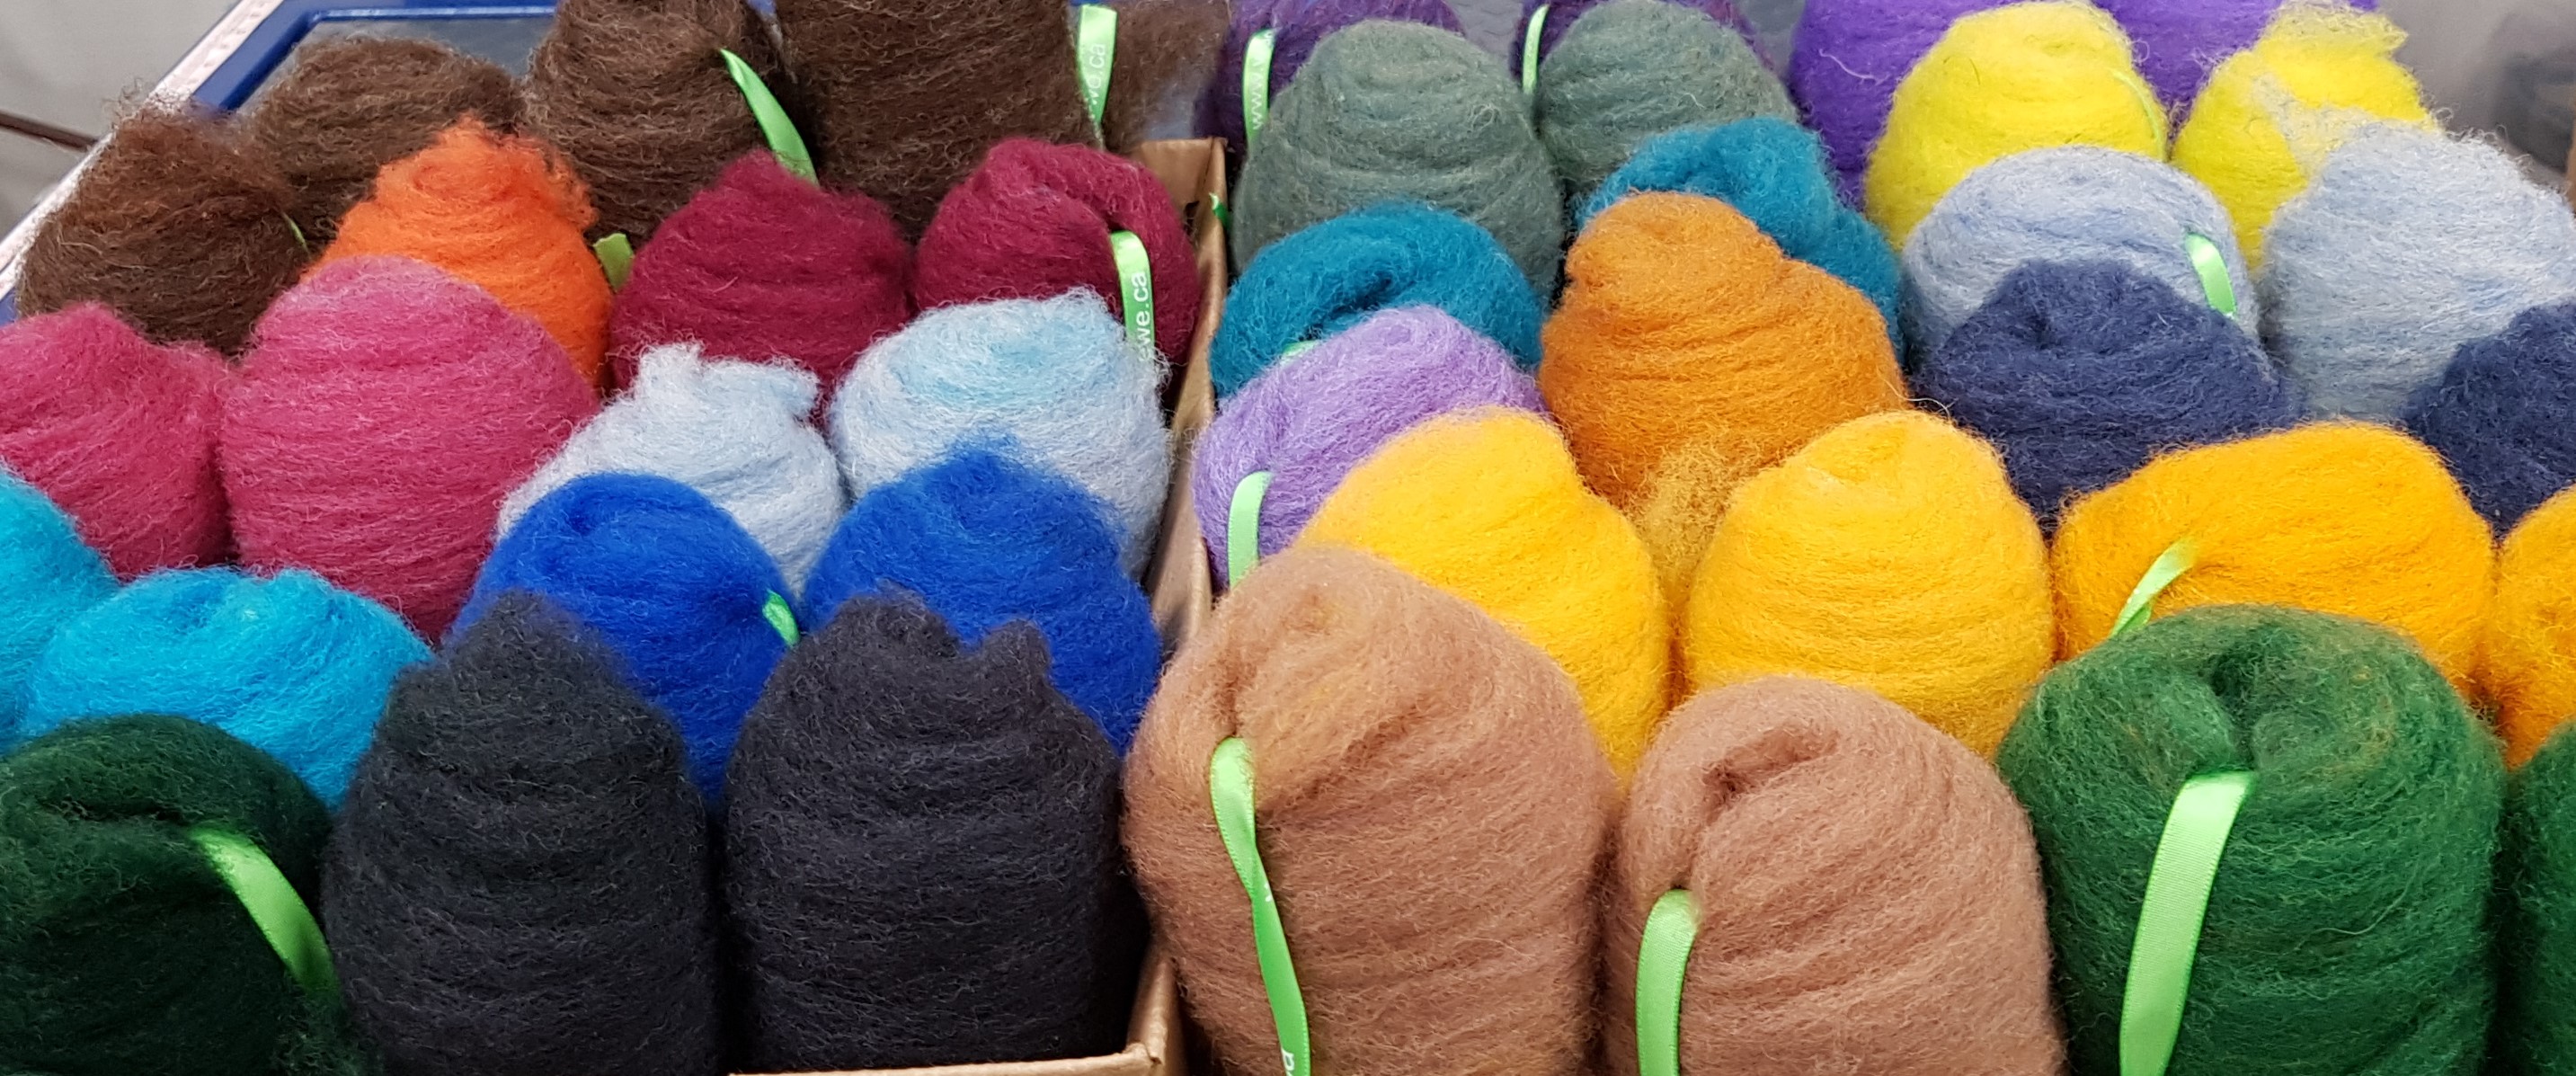 Tray of different coloured wool balls from Wool 4 Ewe